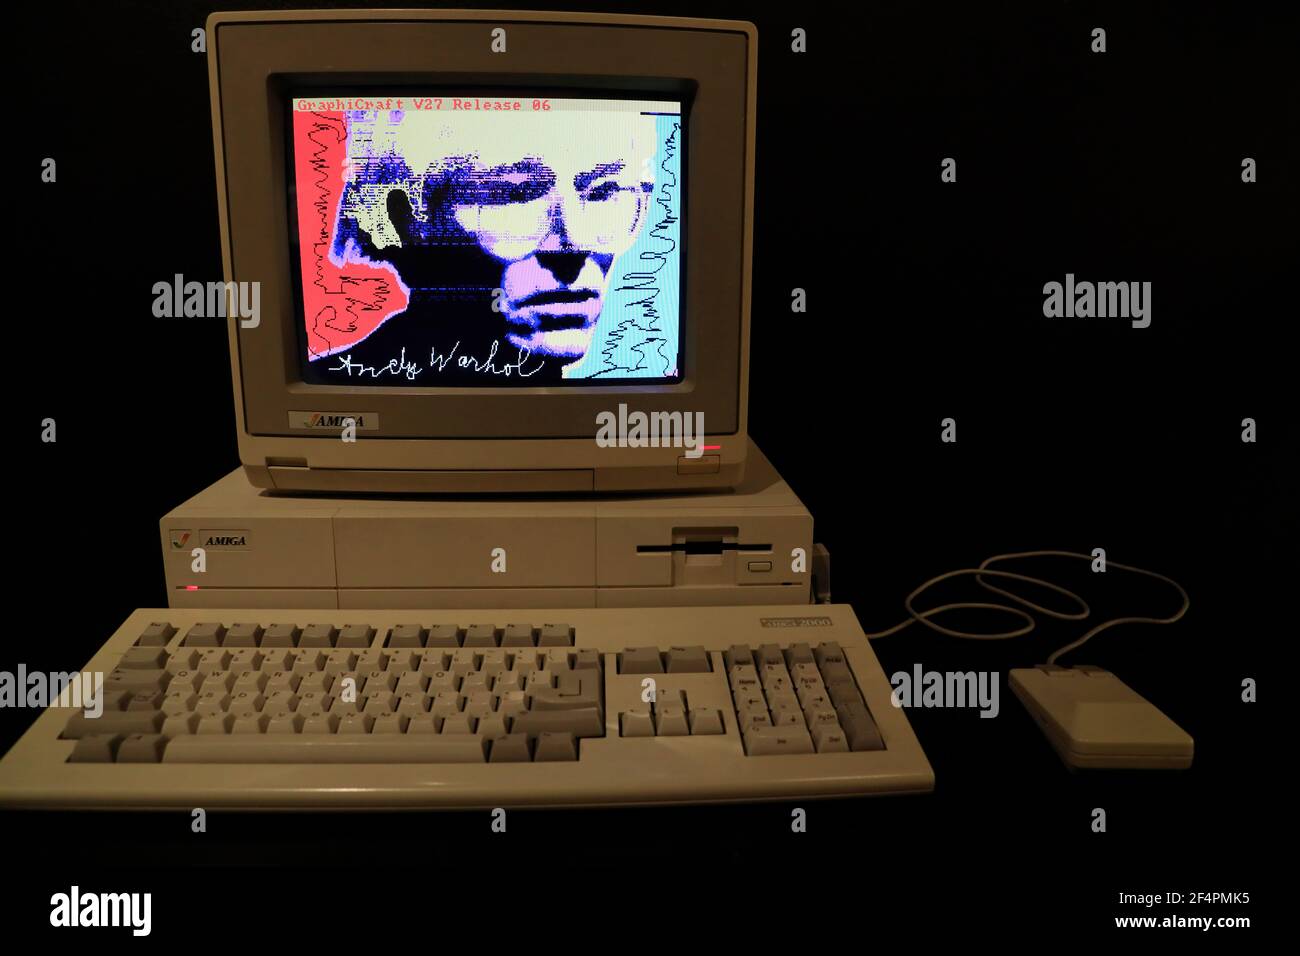 Amiga 1000 personal computer owned by Andy Warhol display in the Andy Warhol Museum.Pittsburgh.Pennsylvania.USA Stock Photo